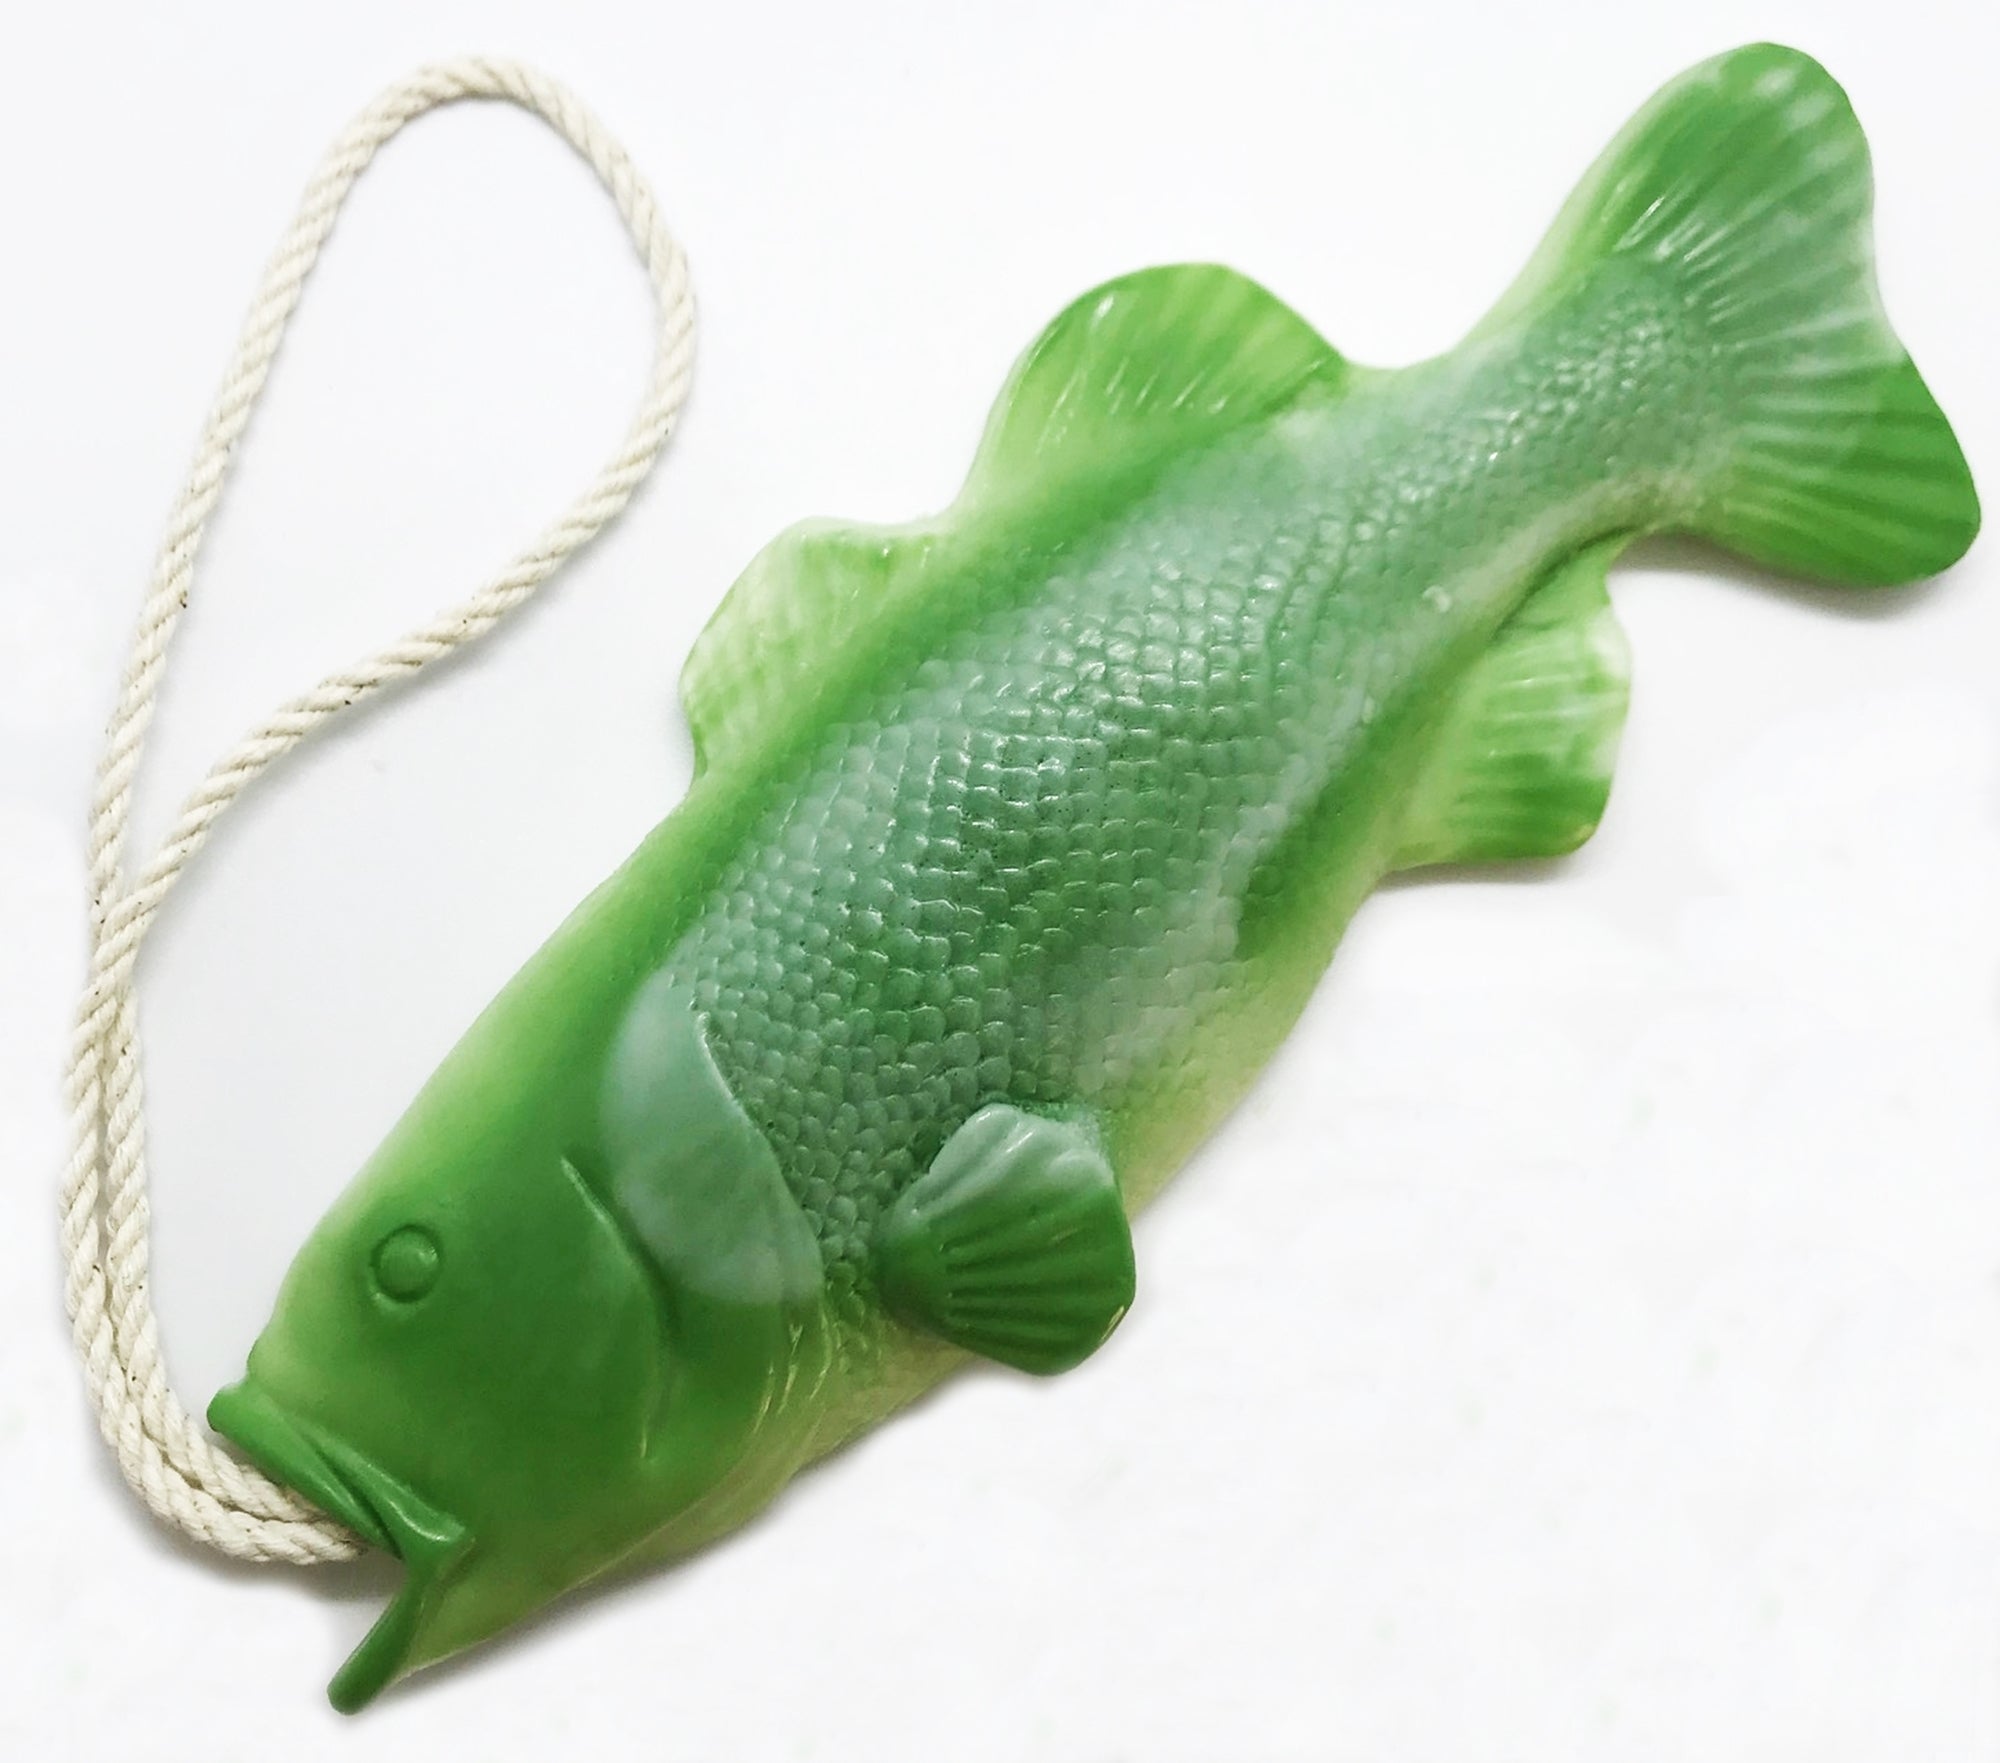 Bass Soap on a Rope, Bass Fishing Gifts, Stocking Stuffers for Men – Dope  on a Rope Soap